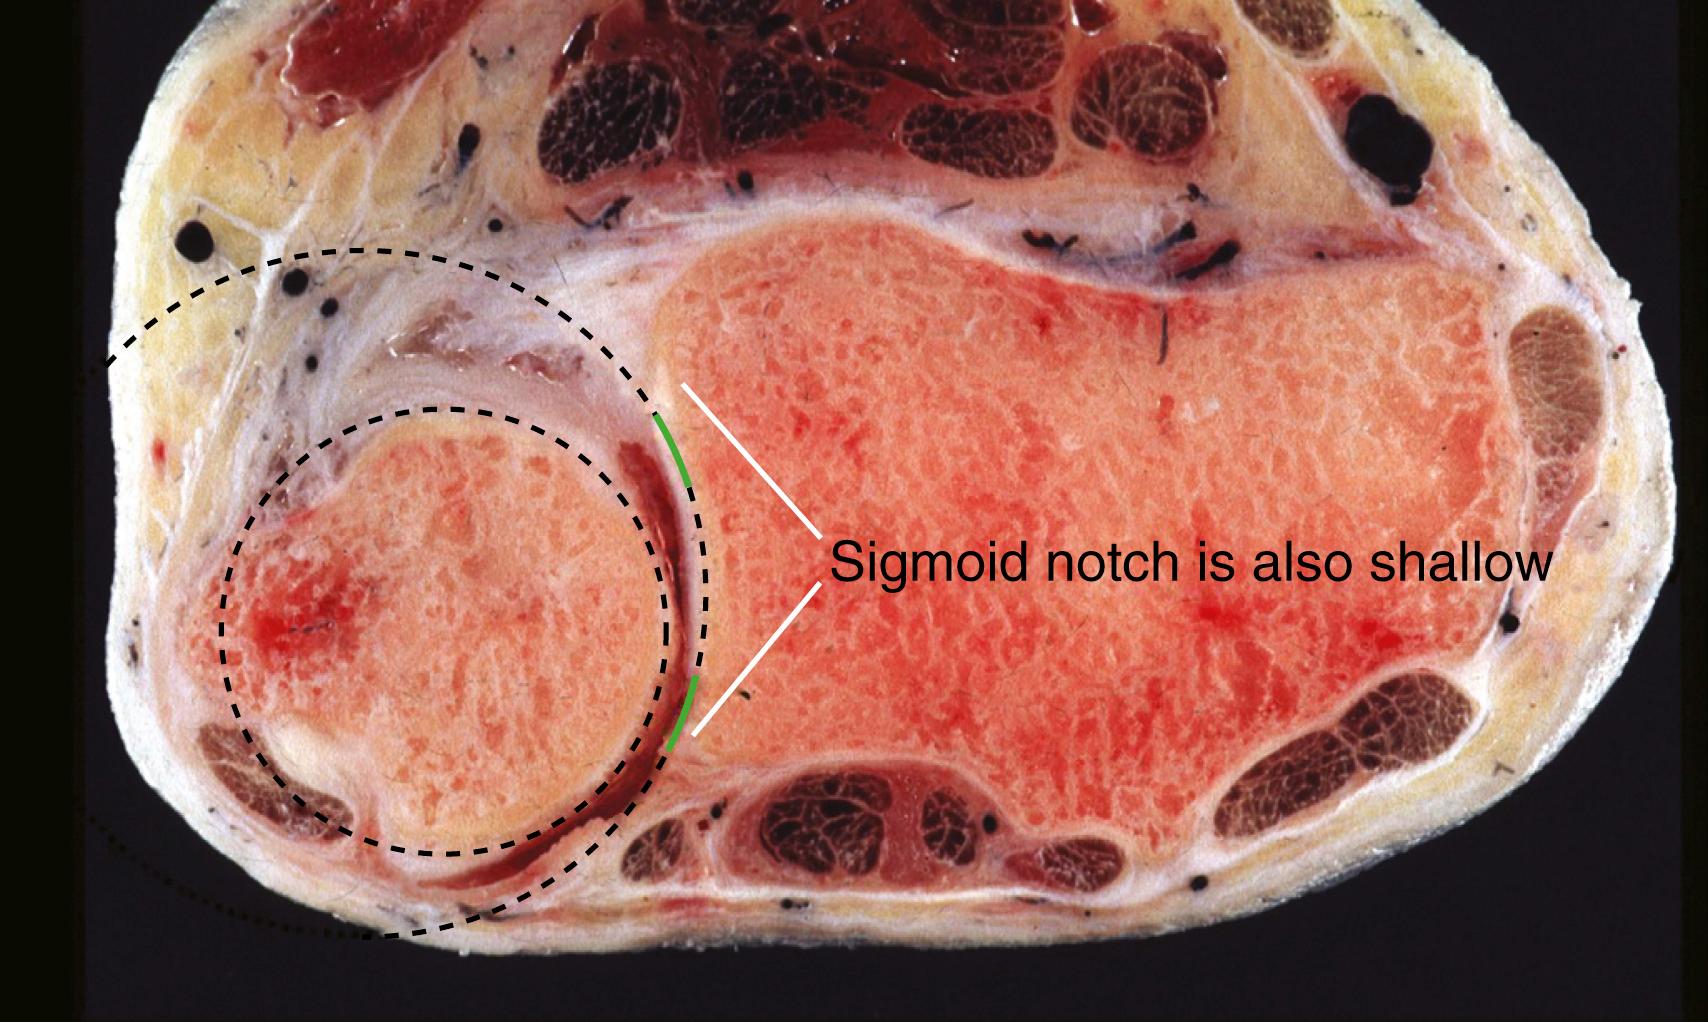 Fig. 14.2, Cross section through distal radial ulnar joint in a cadaver. The rims of the sigmoid notch are augmented by fibrocartilaginous lips. The sigmoid notch is shallow, and its radius at curvature is substantially larger than at the ulnar head.